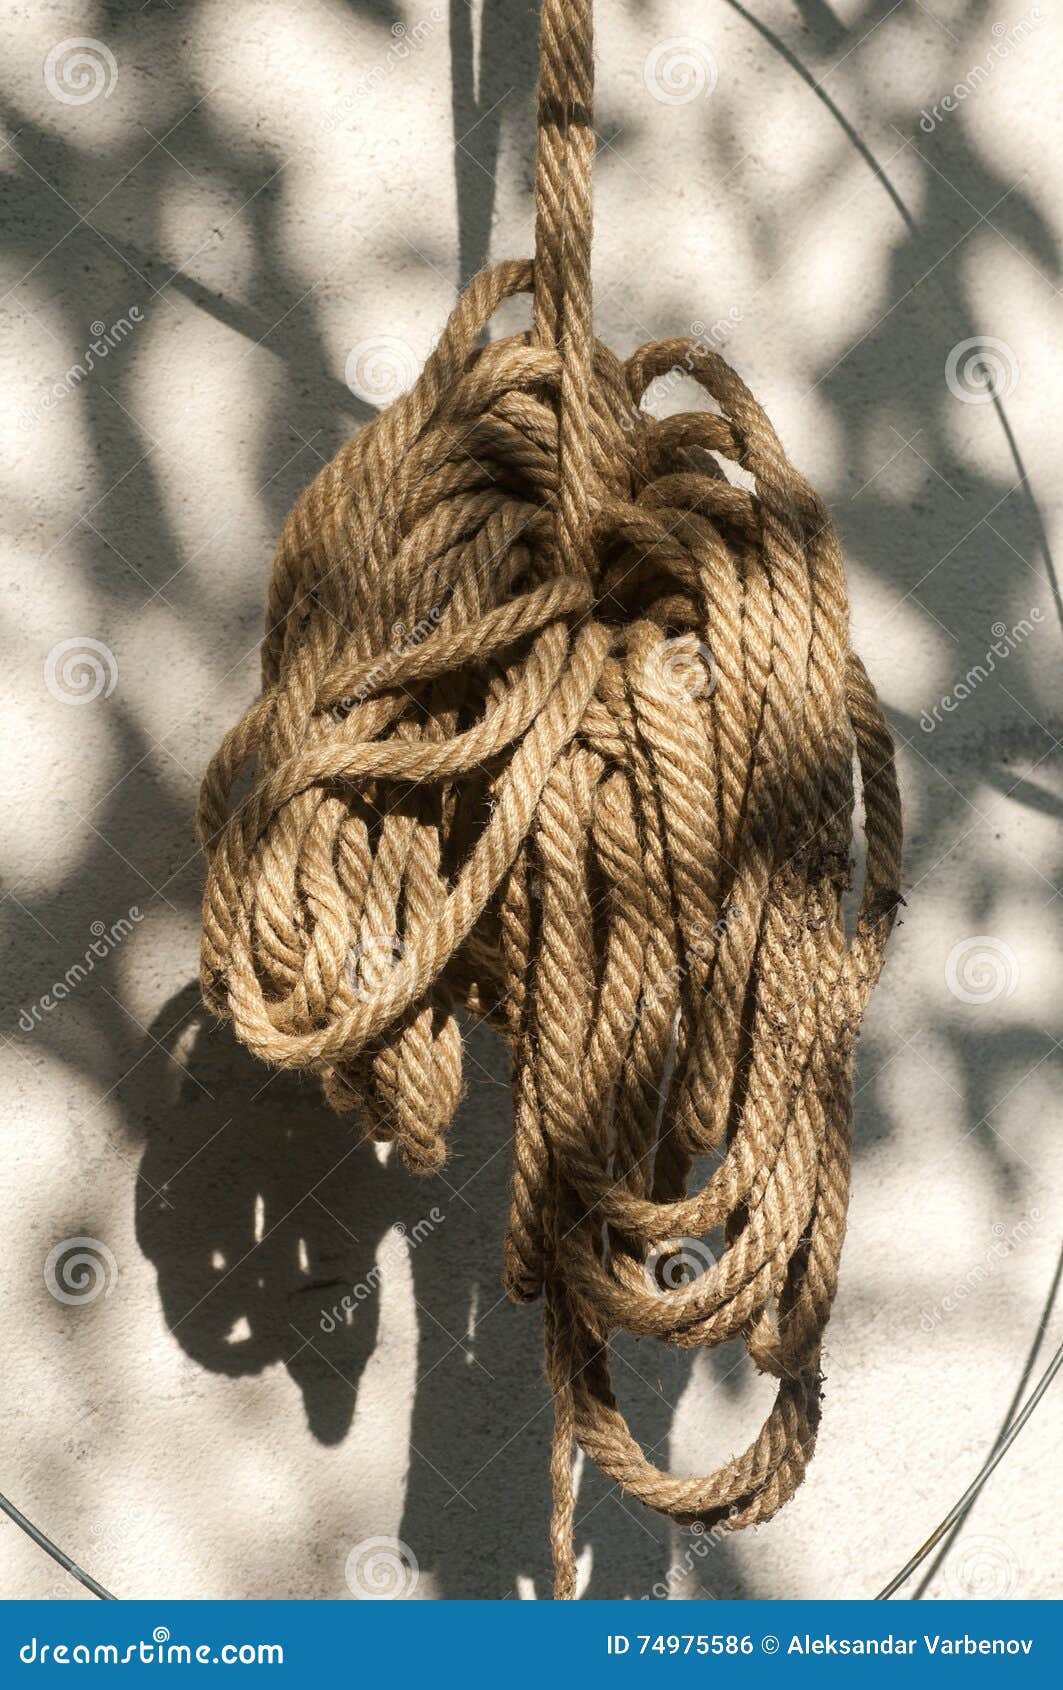 https://thumbs.dreamstime.com/z/hemp-rope-hung-wall-old-tied-knot-white-plastered-tree-shadows-74975586.jpg